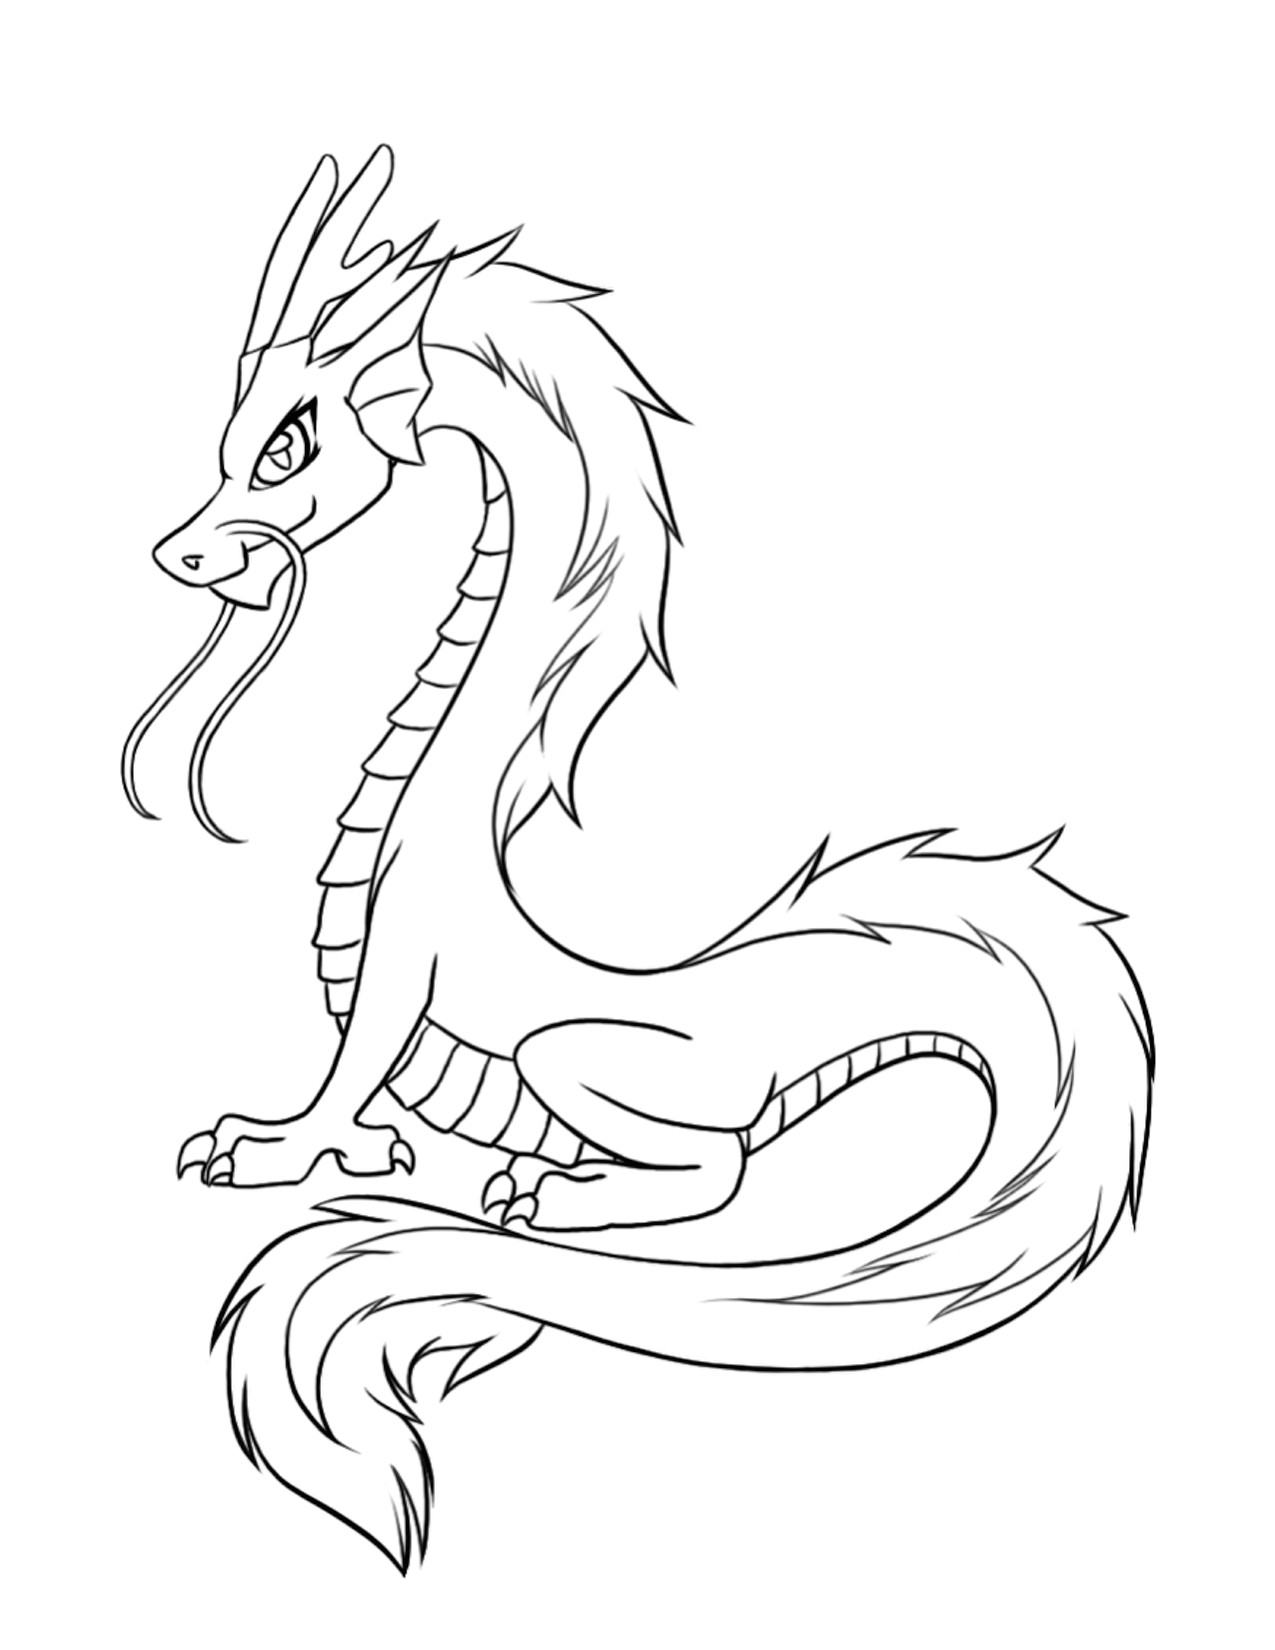 Dragons Flying Drawing Free Printable Dragon Coloring Pages for Kids Dragon Sketch